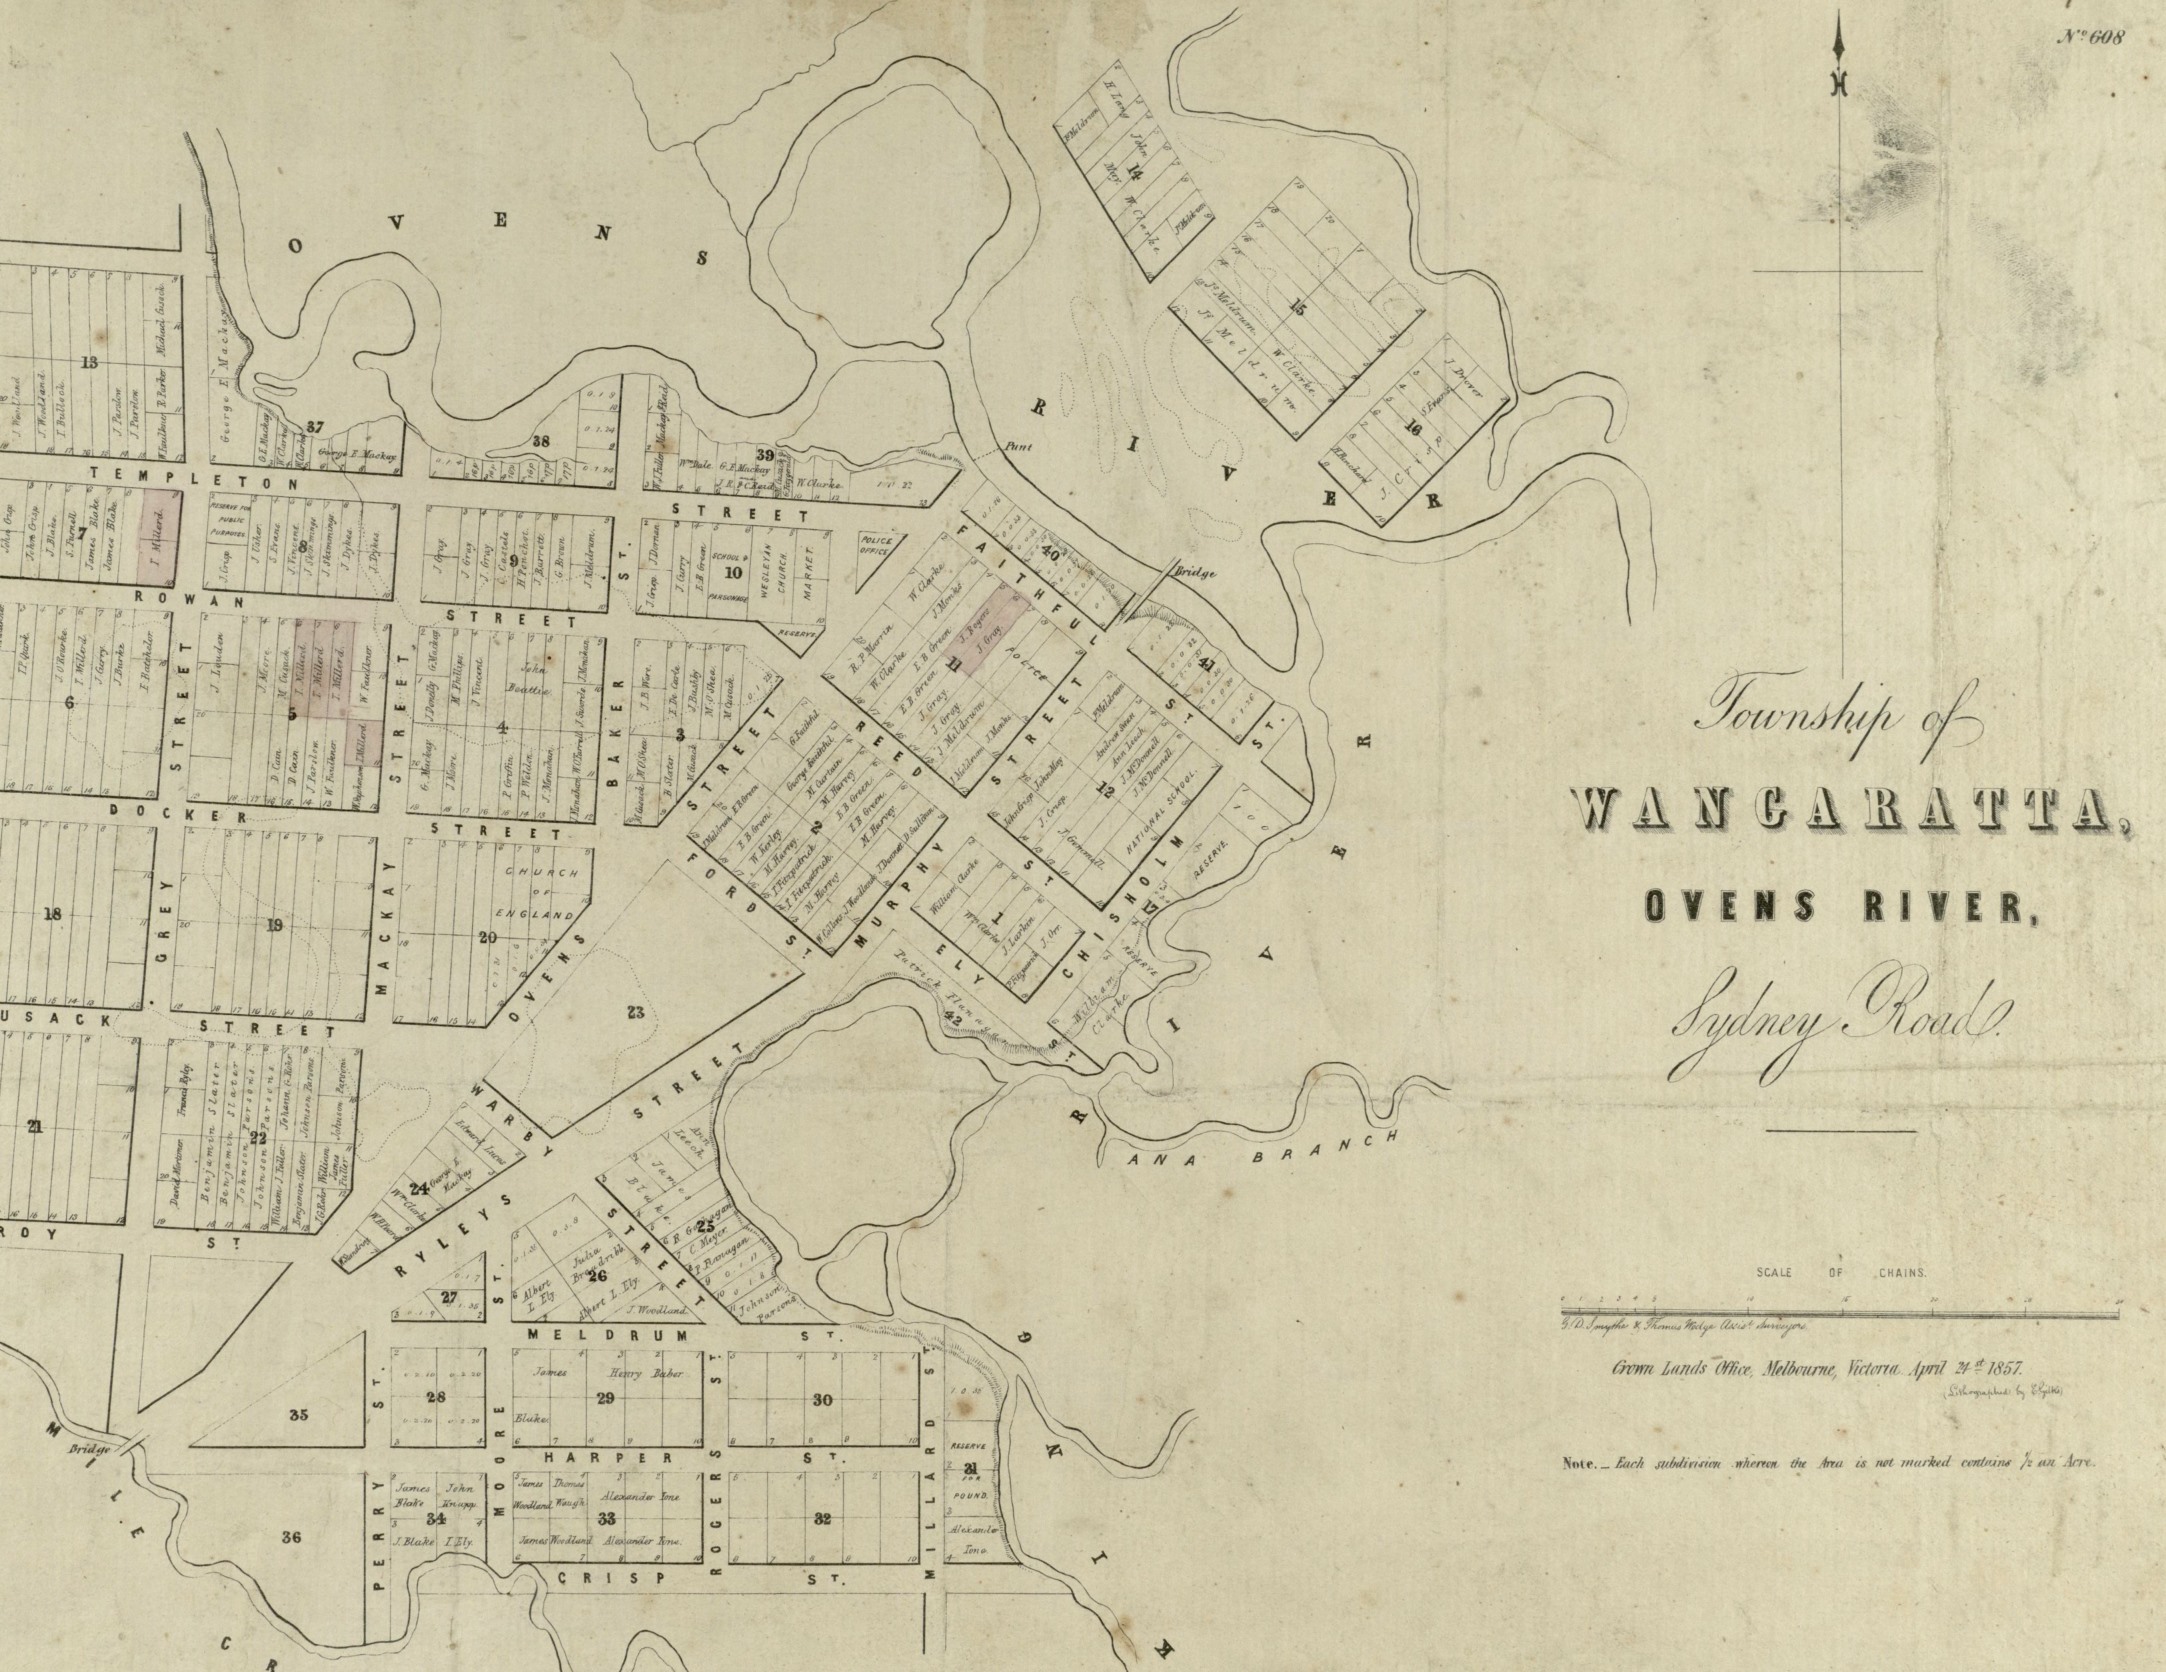 Survey map of Wangaratta by Smythe & Wedge 1857 courtesy State Library of Victoria. The King River runs north-south at the bottom of the map and the Ovens winds erratically across the top. 